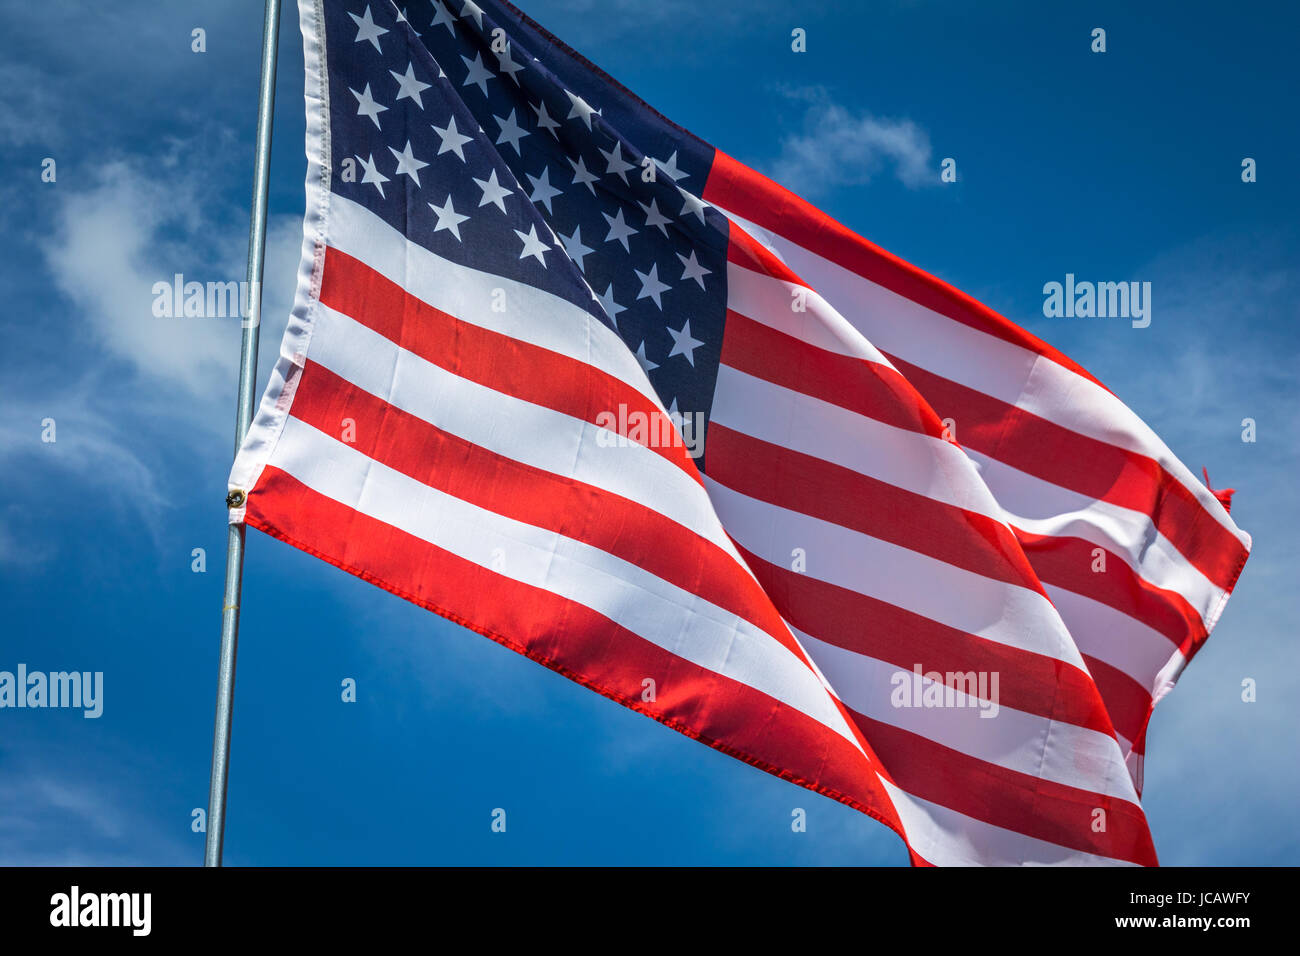 Horizontal photo of a red, white and blue American flag on a silver pole waving in the breeze Stock Photo